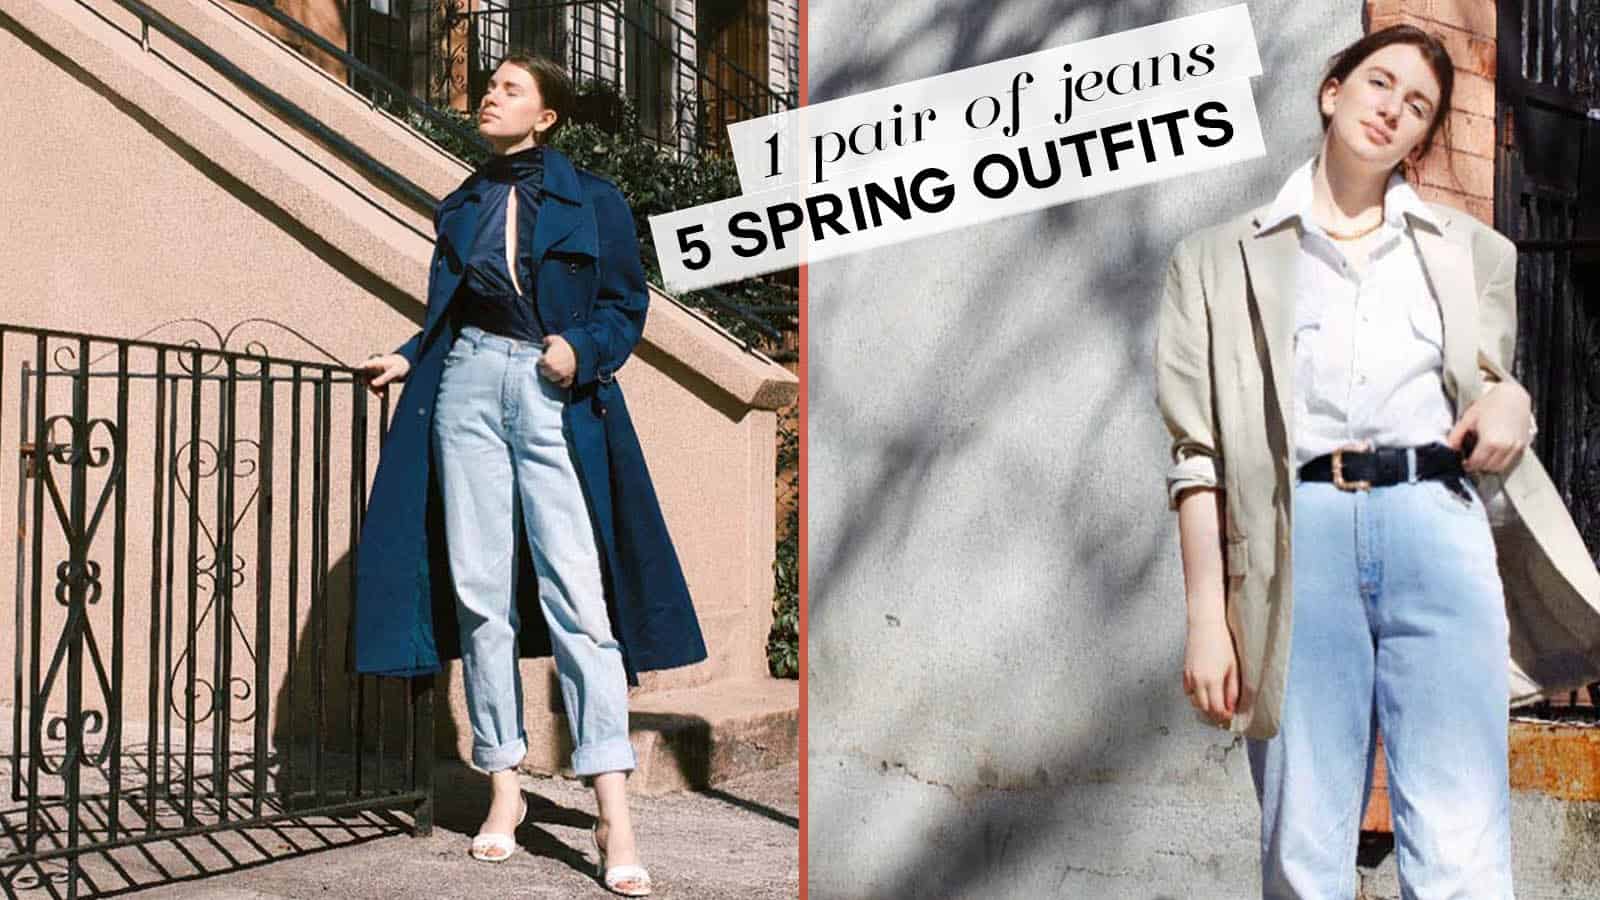 5 Irresistible spring outfits you need to try with 1 pair of jeans